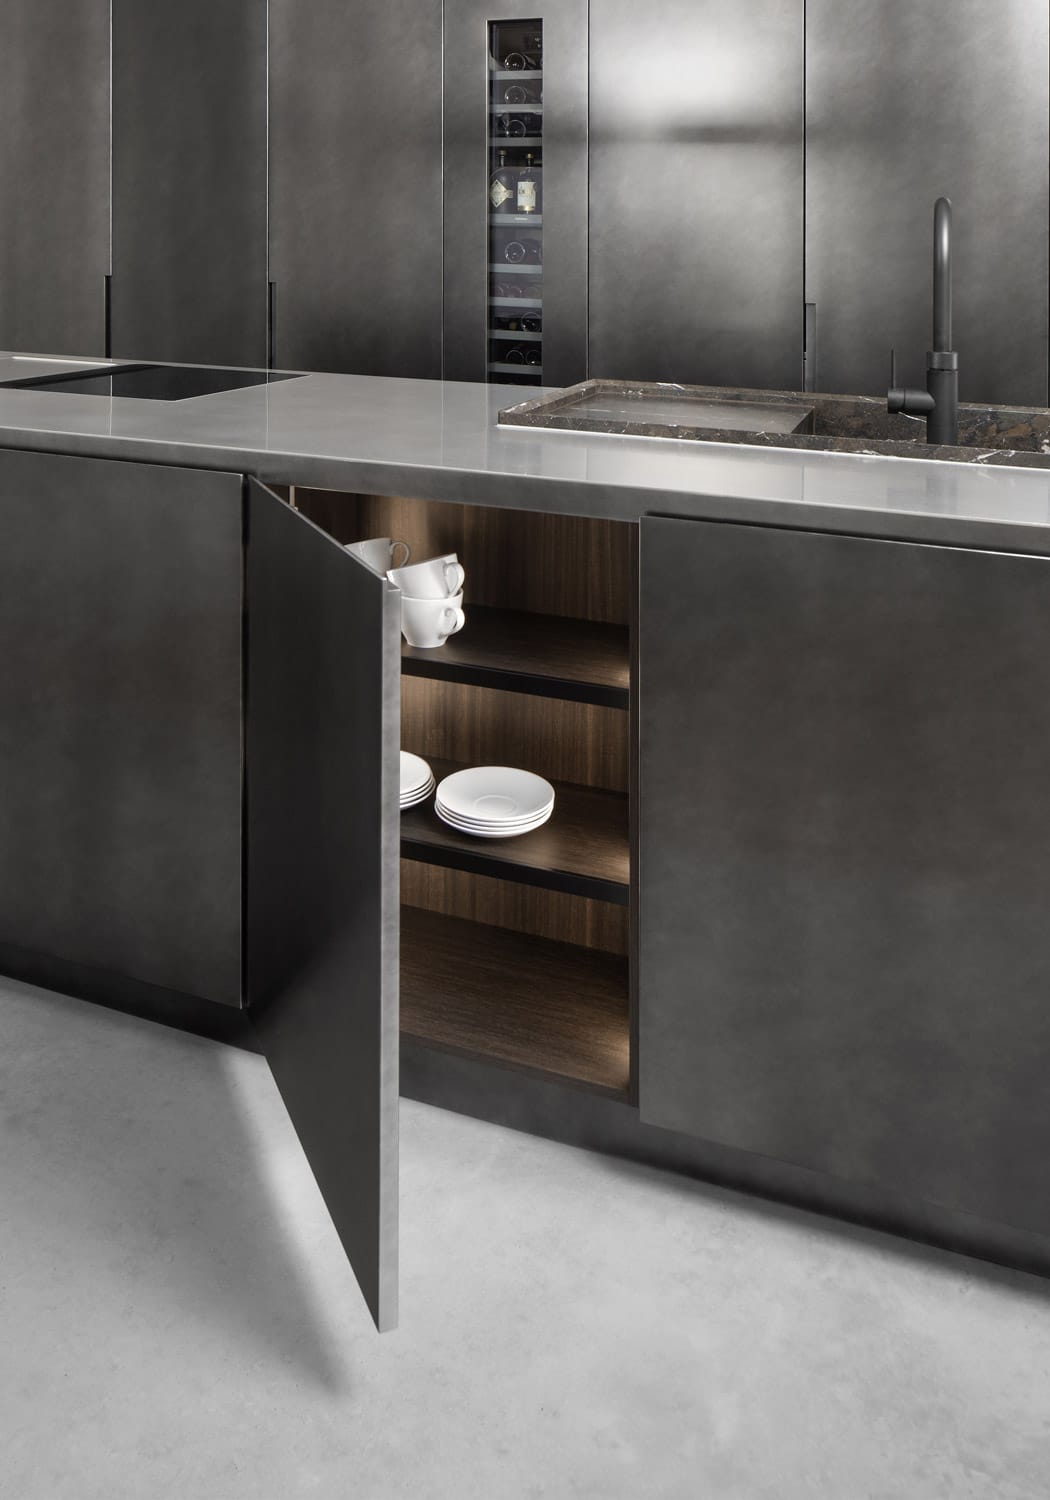 Inside the cabinets, the Eukalipto melamine finish adds warmth, softening the look of the Oxidized Steel metal.